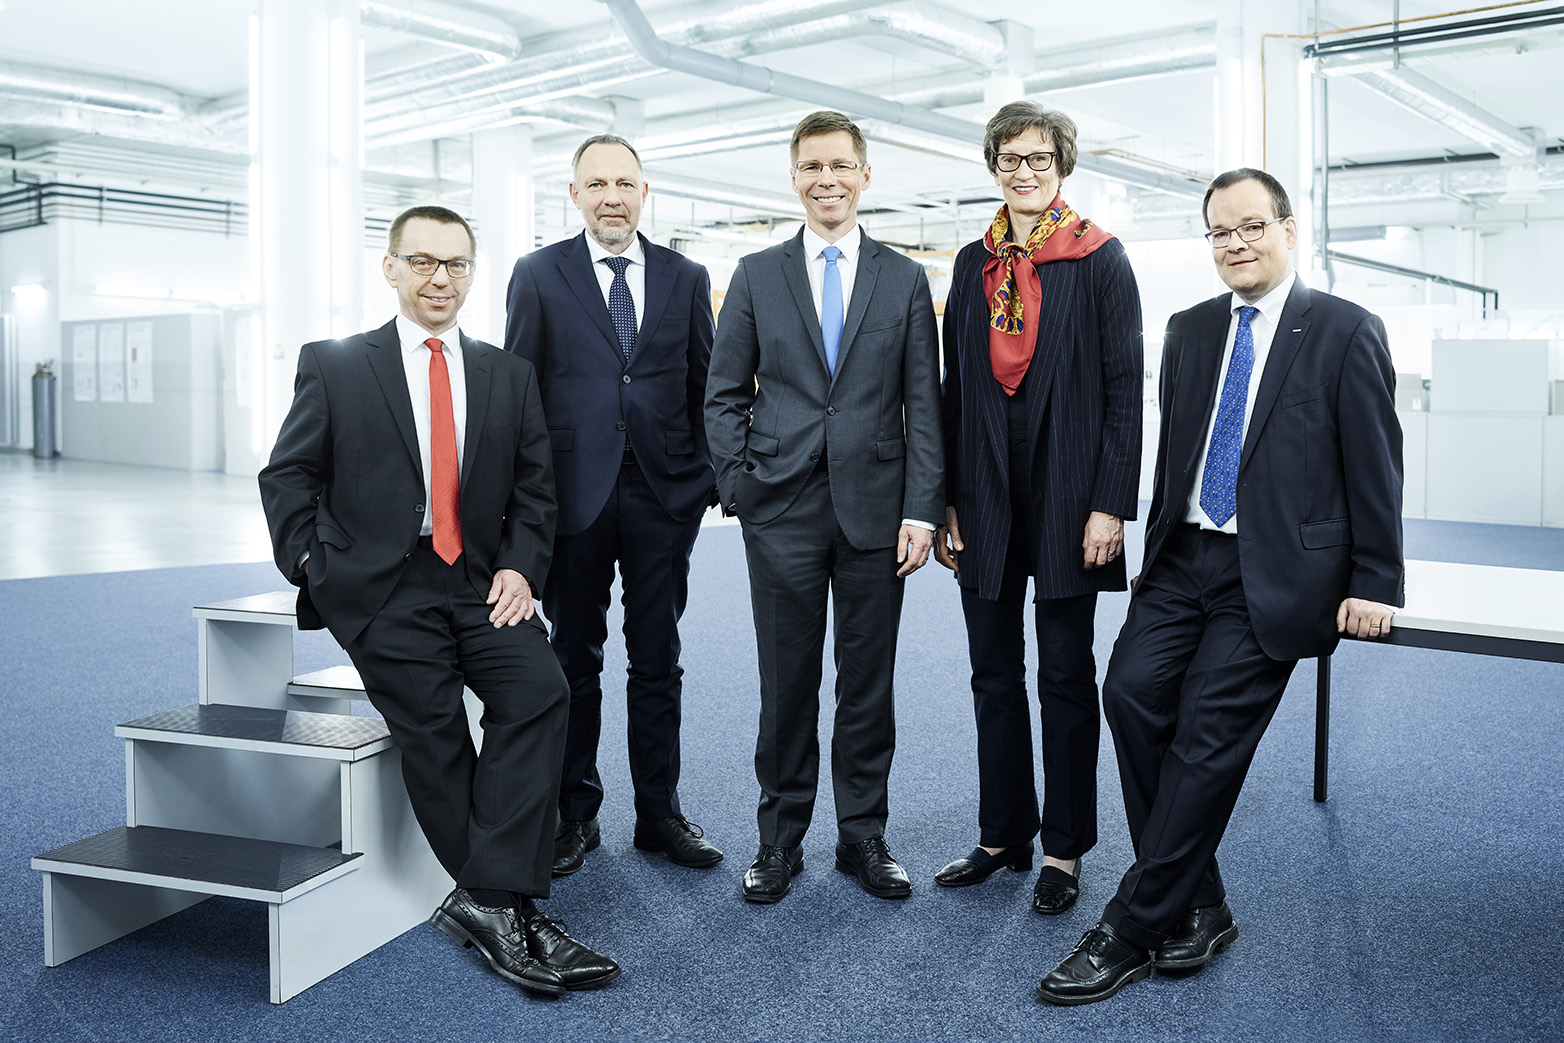 Starting the year as a proven team with a new leader (from left): The ETH Executive Board with Ulrich Weidmann (Vice President for Human Resources and Infrastructure), Detlef Günther (Vice President for Research and Corporate Relations), Joël Mesot (President), Sarah Springman (Rector), and Robert Perich (Vice President for Finance and Controlling). (Photo: Markus Bertschi / ETH Zurich).